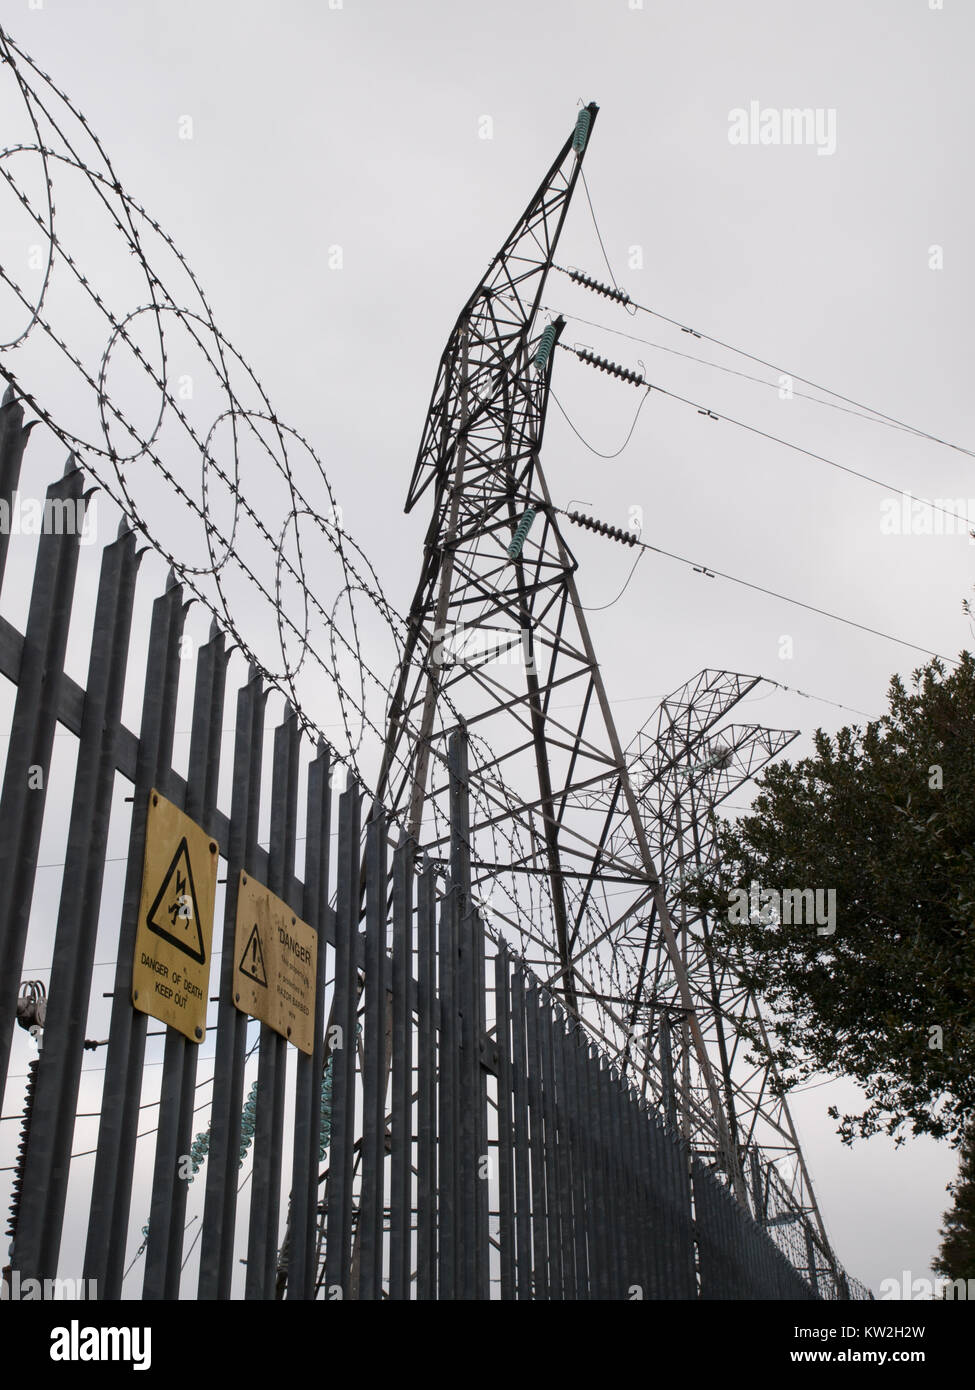 Electricity pylons behind razor wire security fence with warning signs Stock Photo